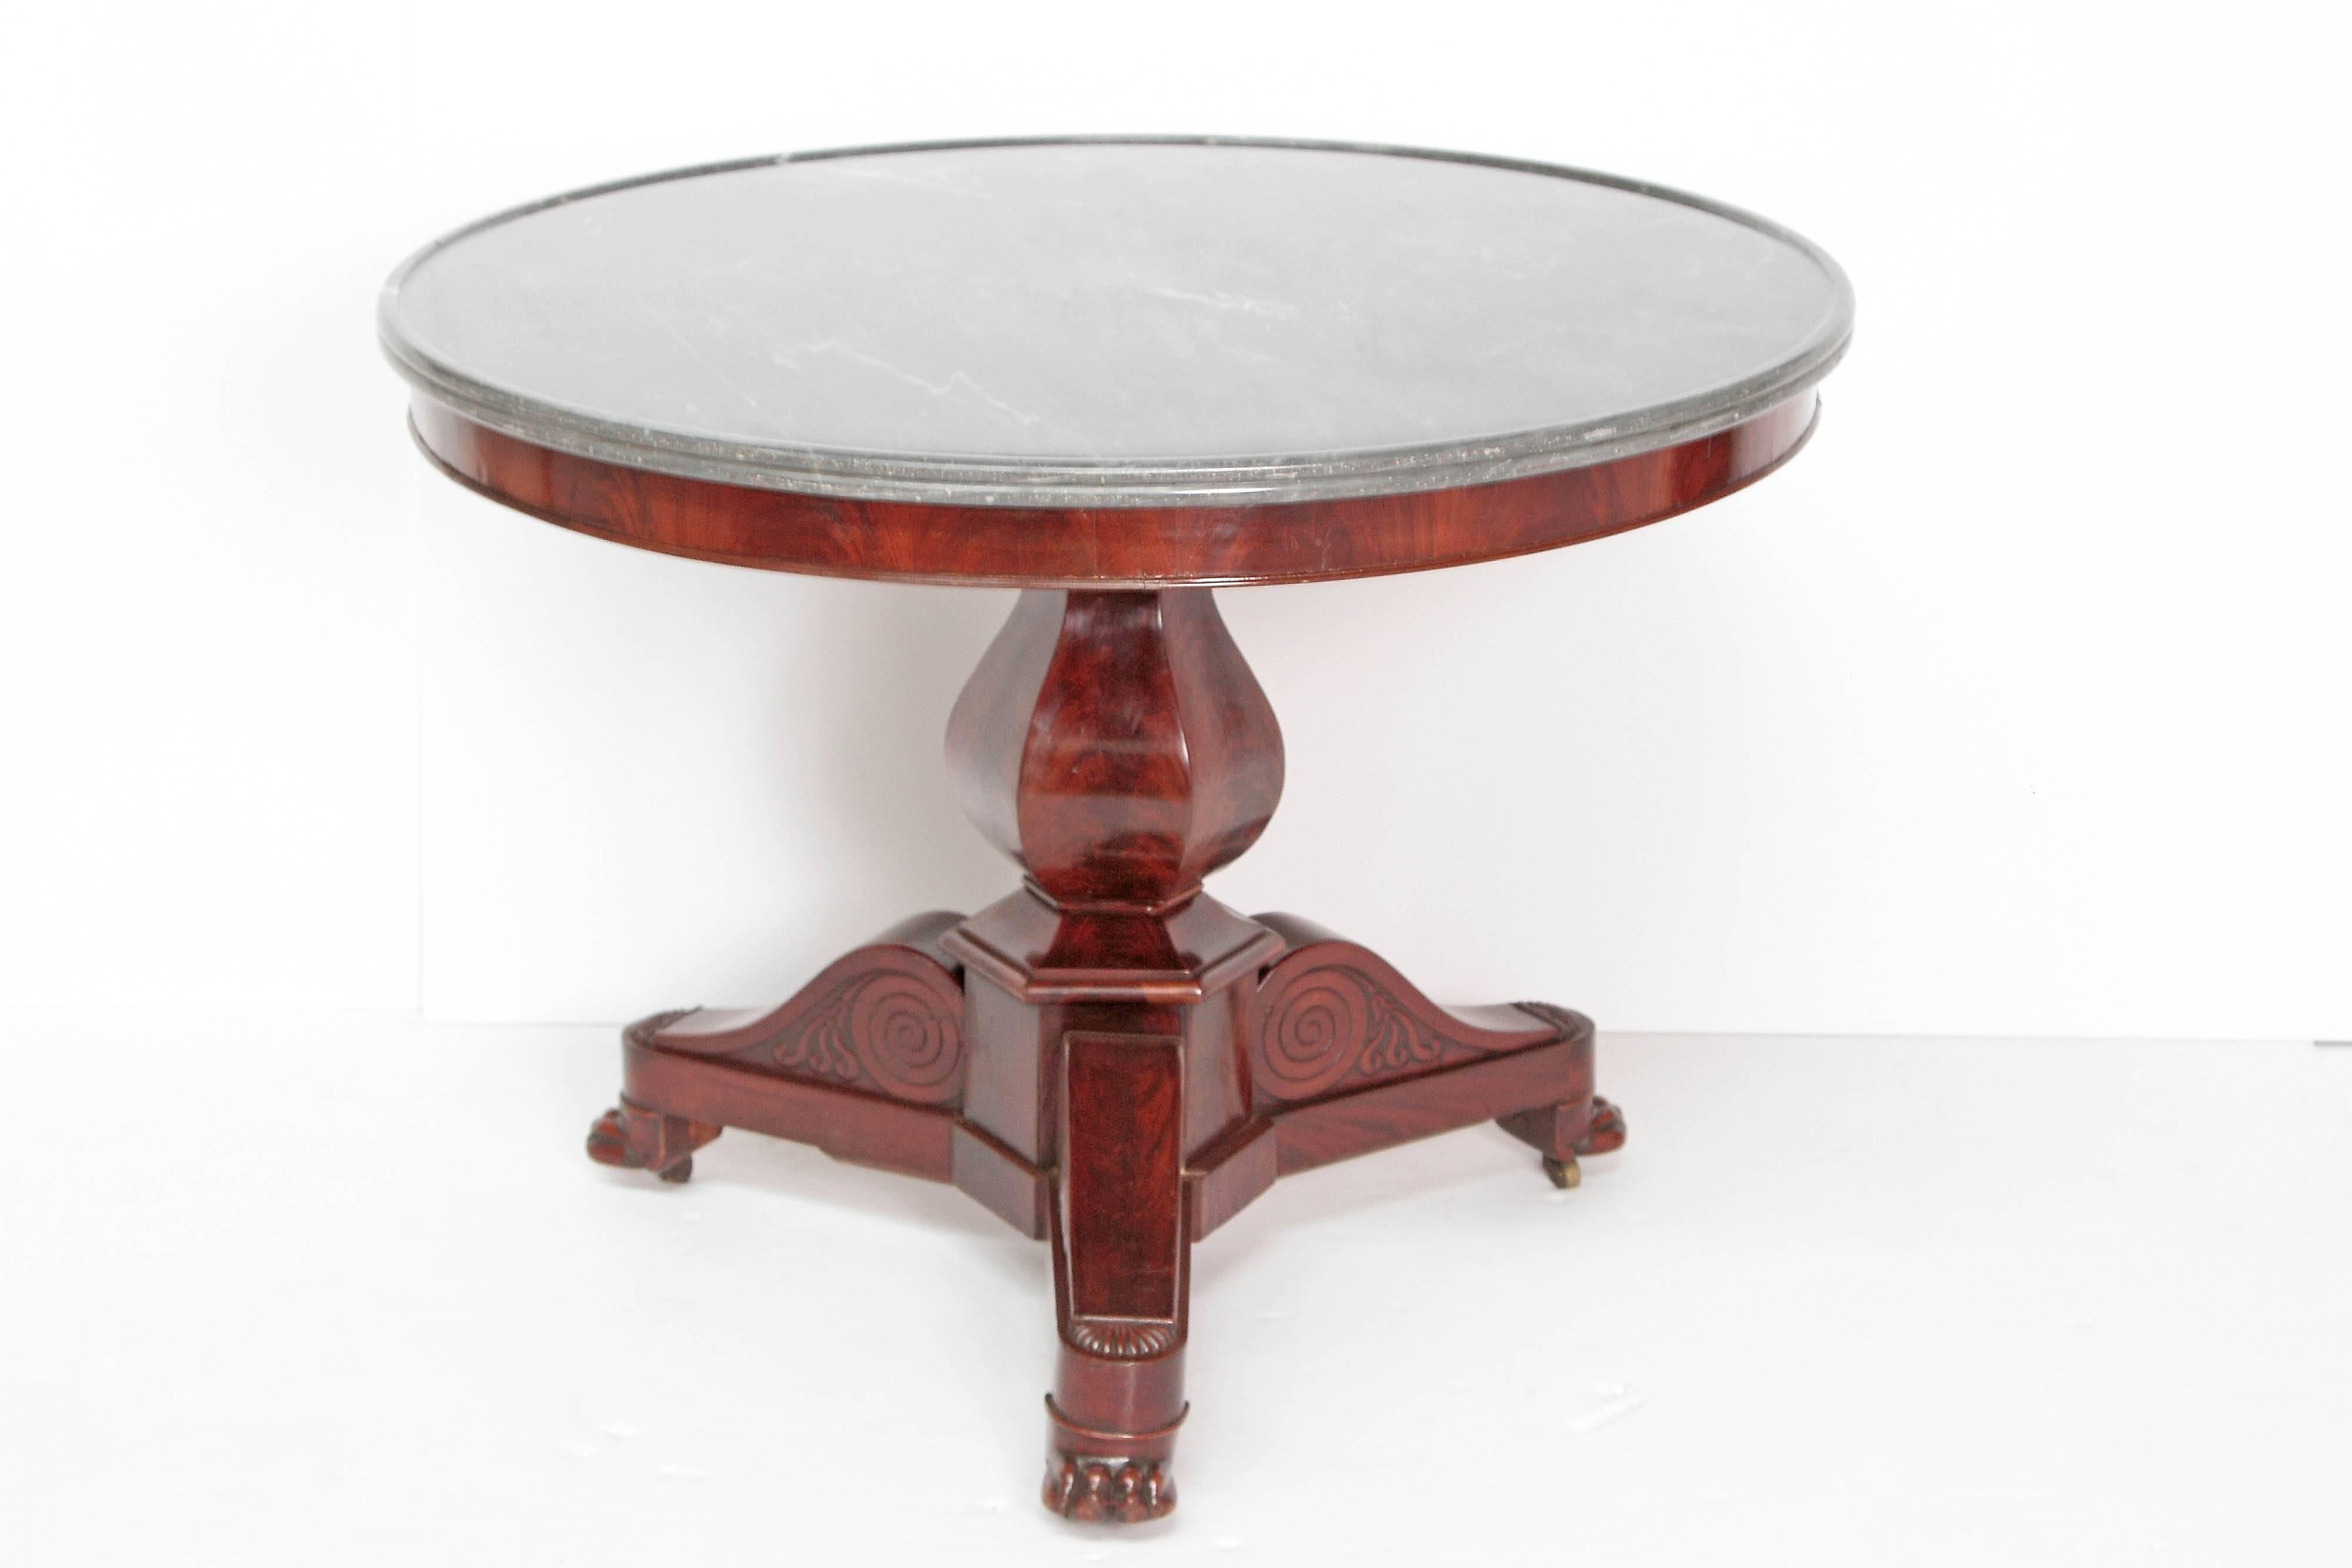 Carved Mid-19th Century Charles X Walnut Center Table with Grey Marble Top